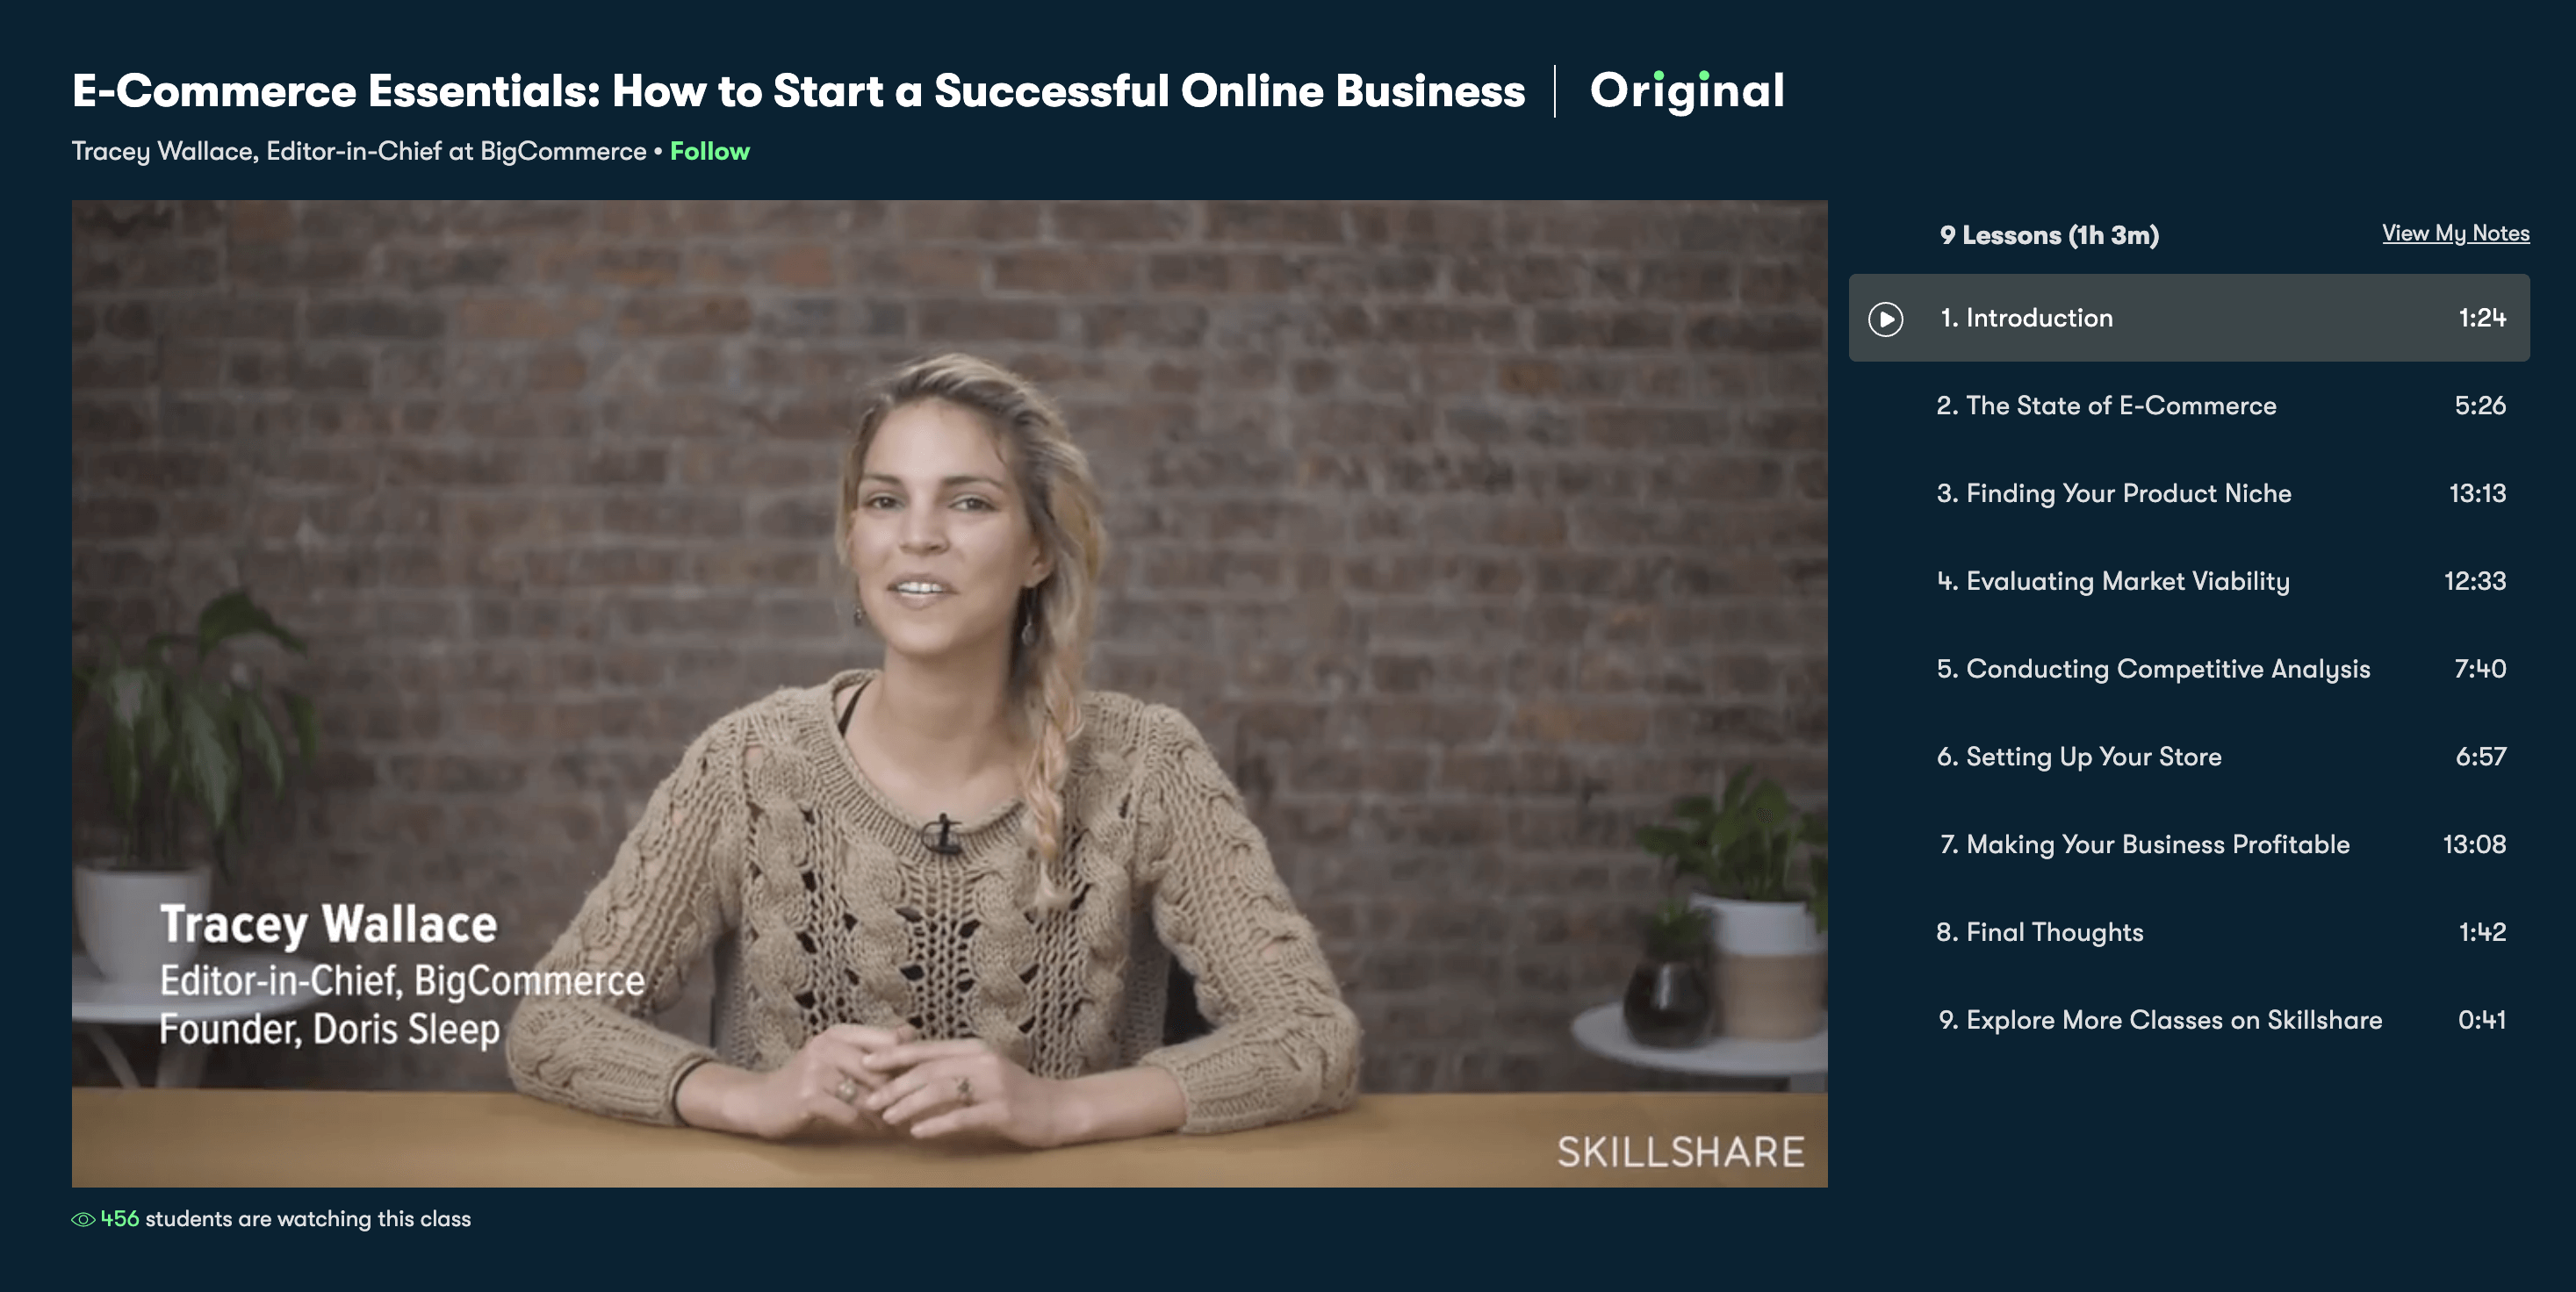 A still from the Skillshare course 'E-Commerce Essentials: How to Start a Successful Online Business'